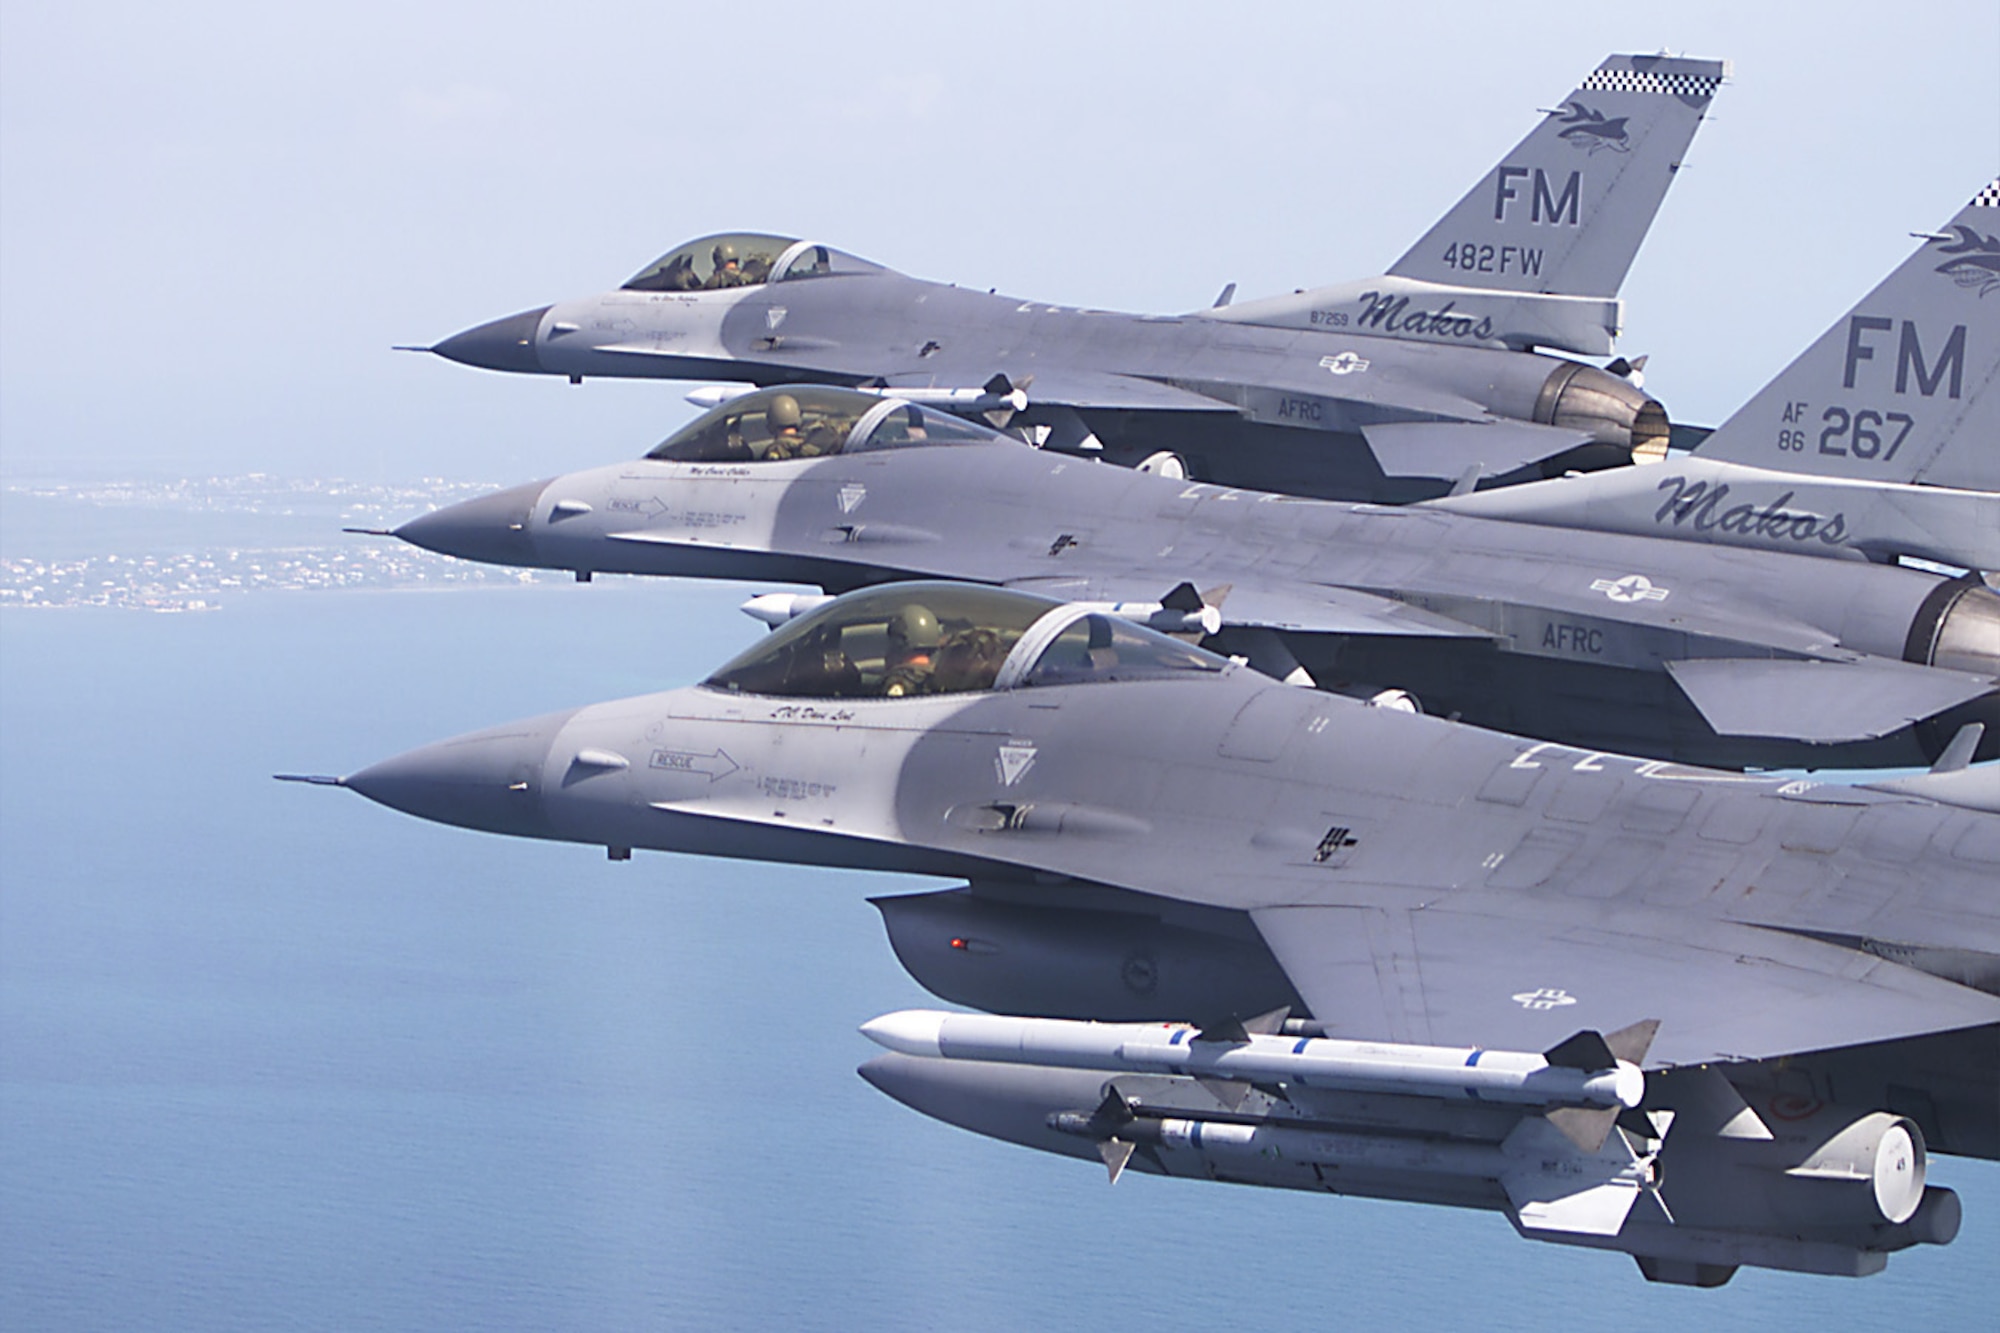 482nd Fighter Wing / 93rd Fighter Squadron closeup of a threeship formation of Lockheed F-16C Fighting Falcons carrying Aim-120 and Aim-9 air-to-air missiles.  The aircraft are based at Homestead Air Reserve Station flying near the Southern Flordia coastline. (Photo by: MSgt Joe Cupido, 4th Combat Camera)